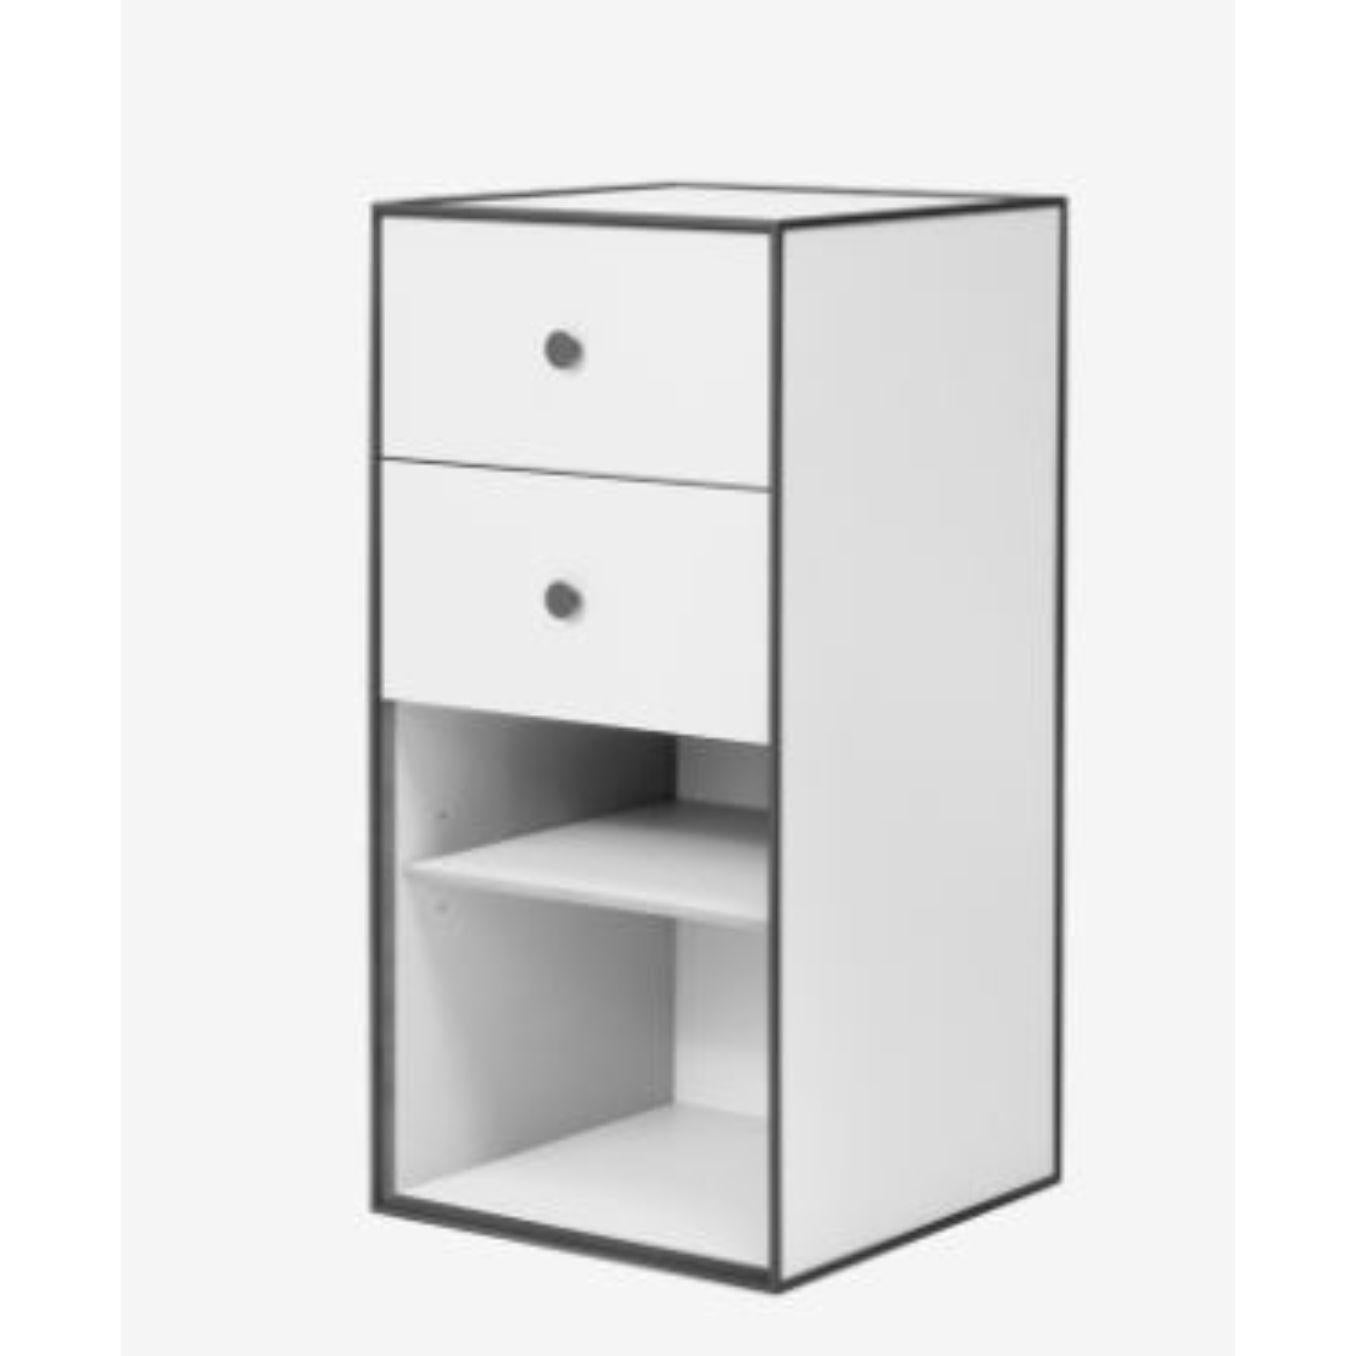 70 white frame box with shelf / 2 drawers by Lassen
Dimensions: D 35 x W 35 x H 70 cm 
Materials: Finér, melamin, melamin, melamine, metal, veneer
Also available in different colours and dimensions. 
Weight: 13 kg.


By Lassen is a Danish